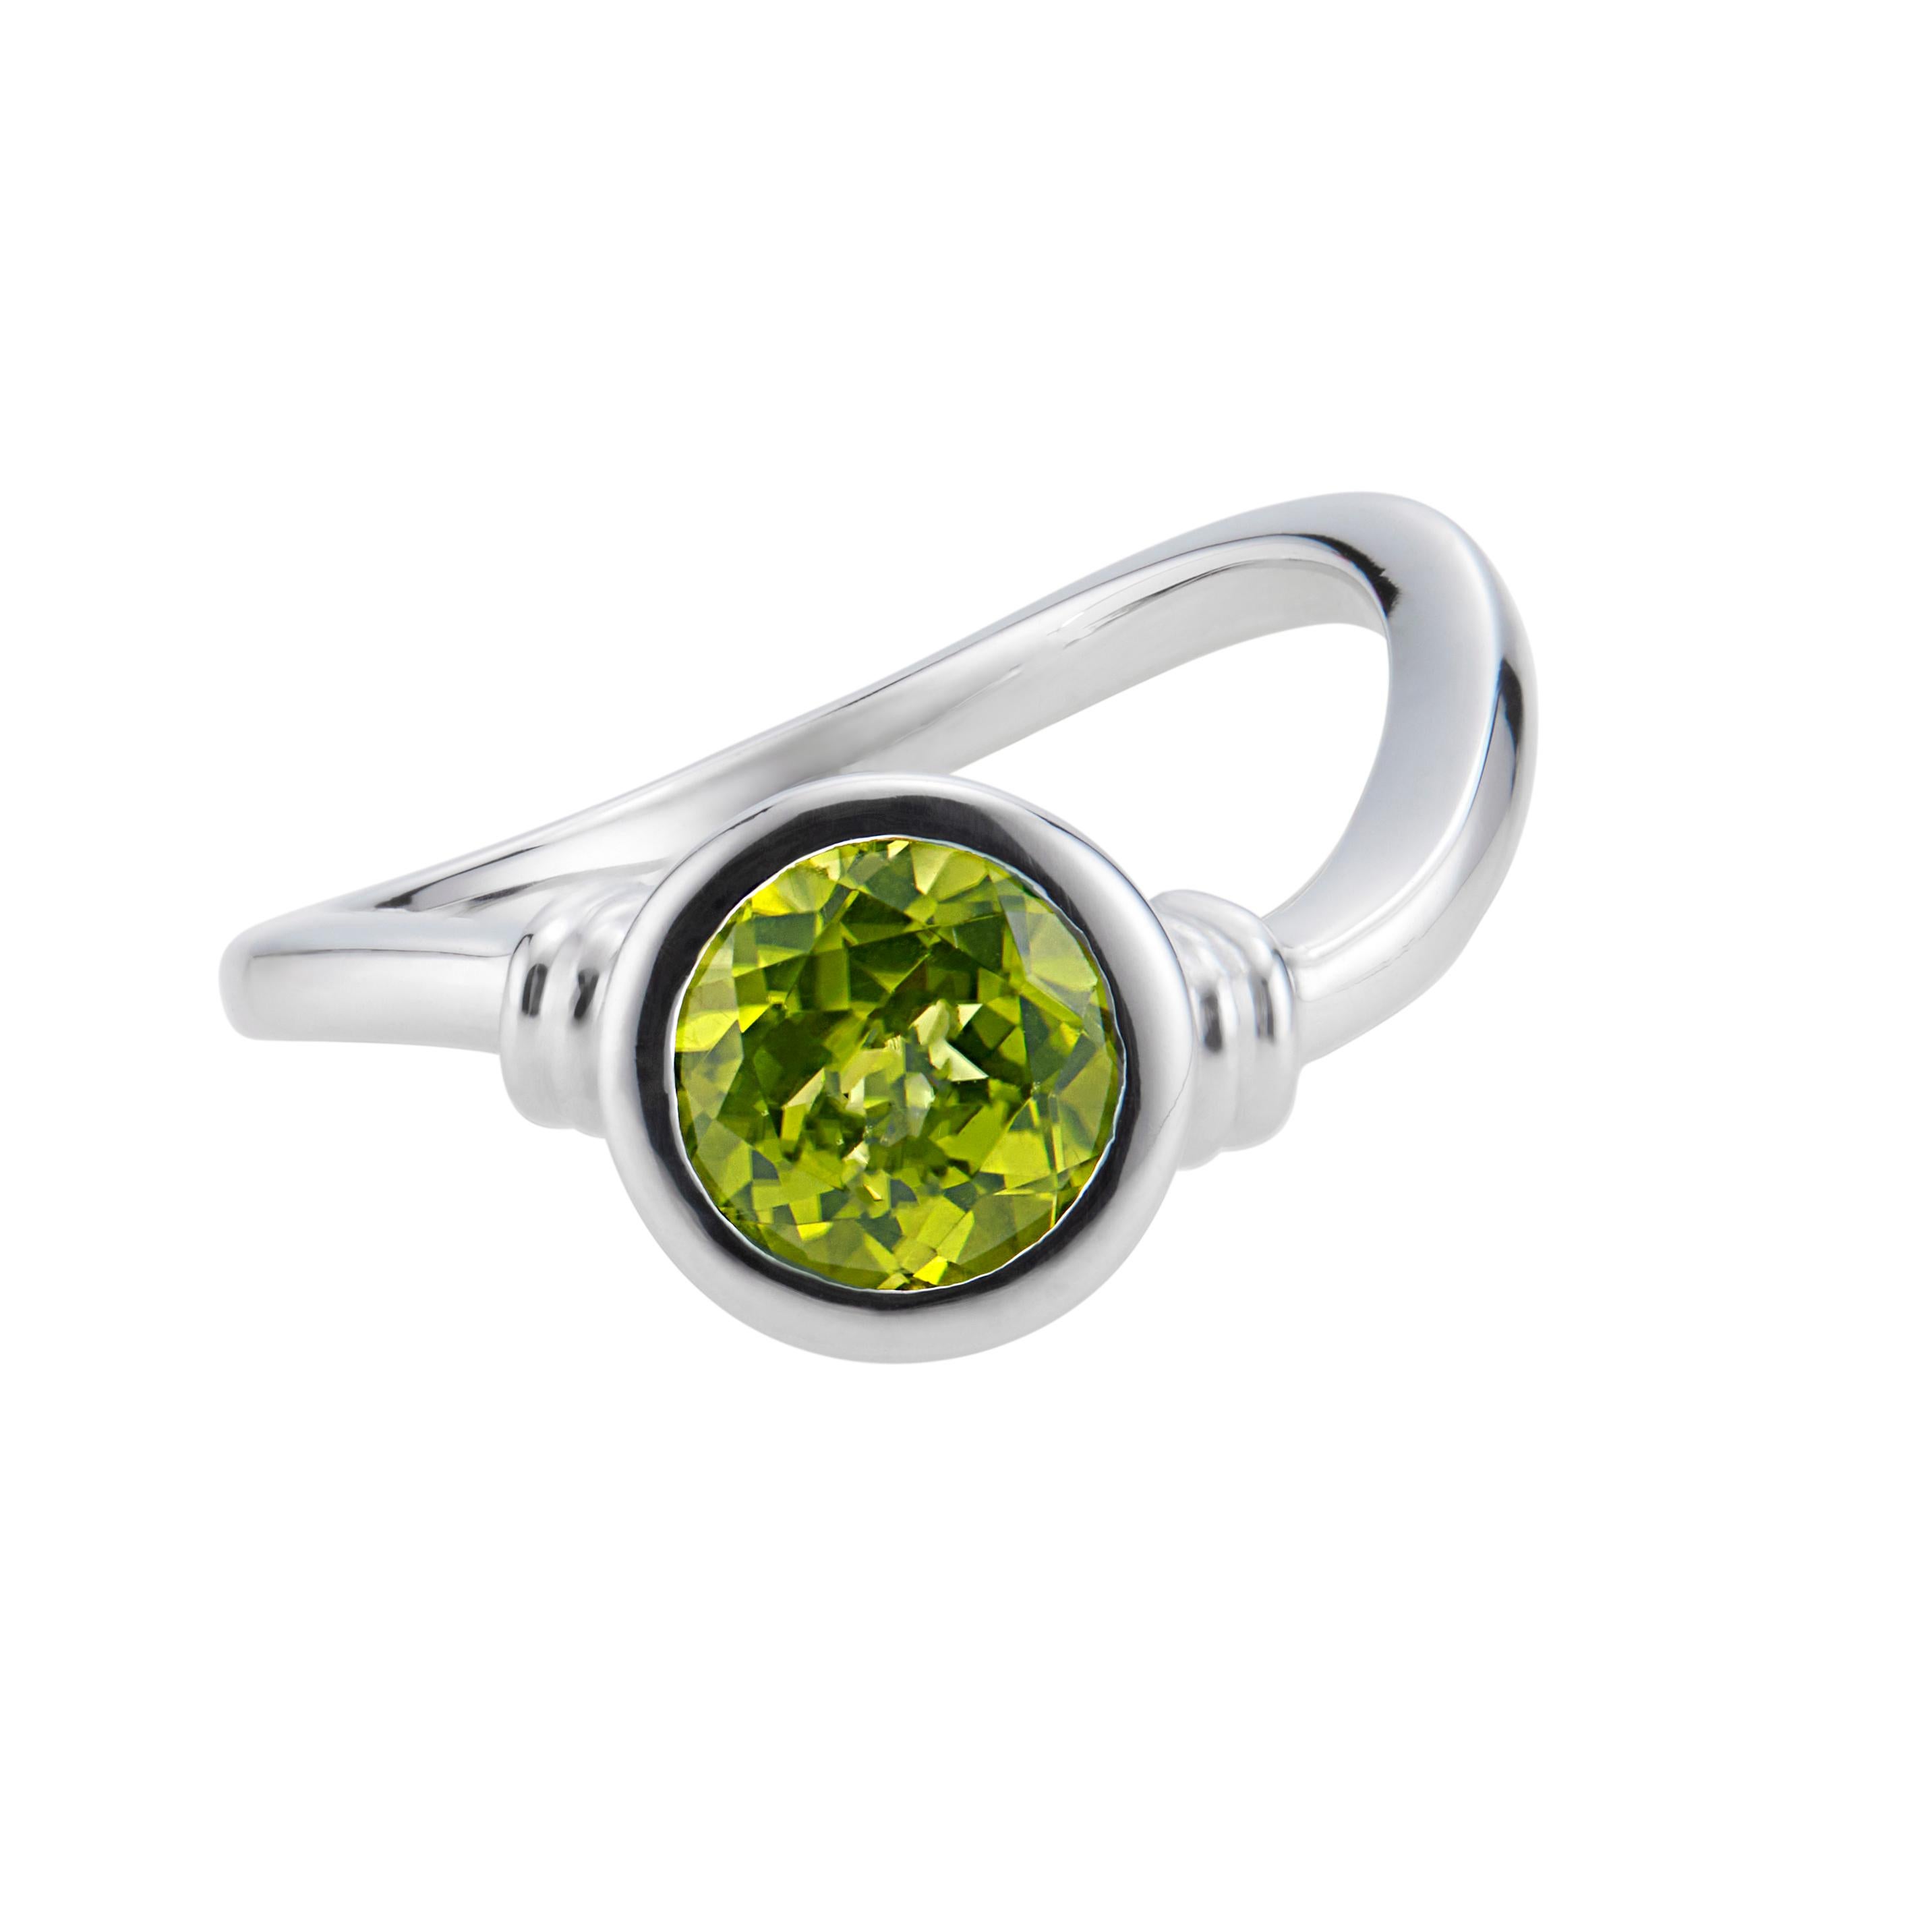 1.10 Carat round peridot engagement ring. 1 round bezel set peridot center stone in a 18k white gold setting by Manfredi of Greenwich, CT 

1 round green peridot, VS approx. 1.10cts
Size 7 and sizable 
18k white gold 
Stamped: 750
Hallmark: Manfredi